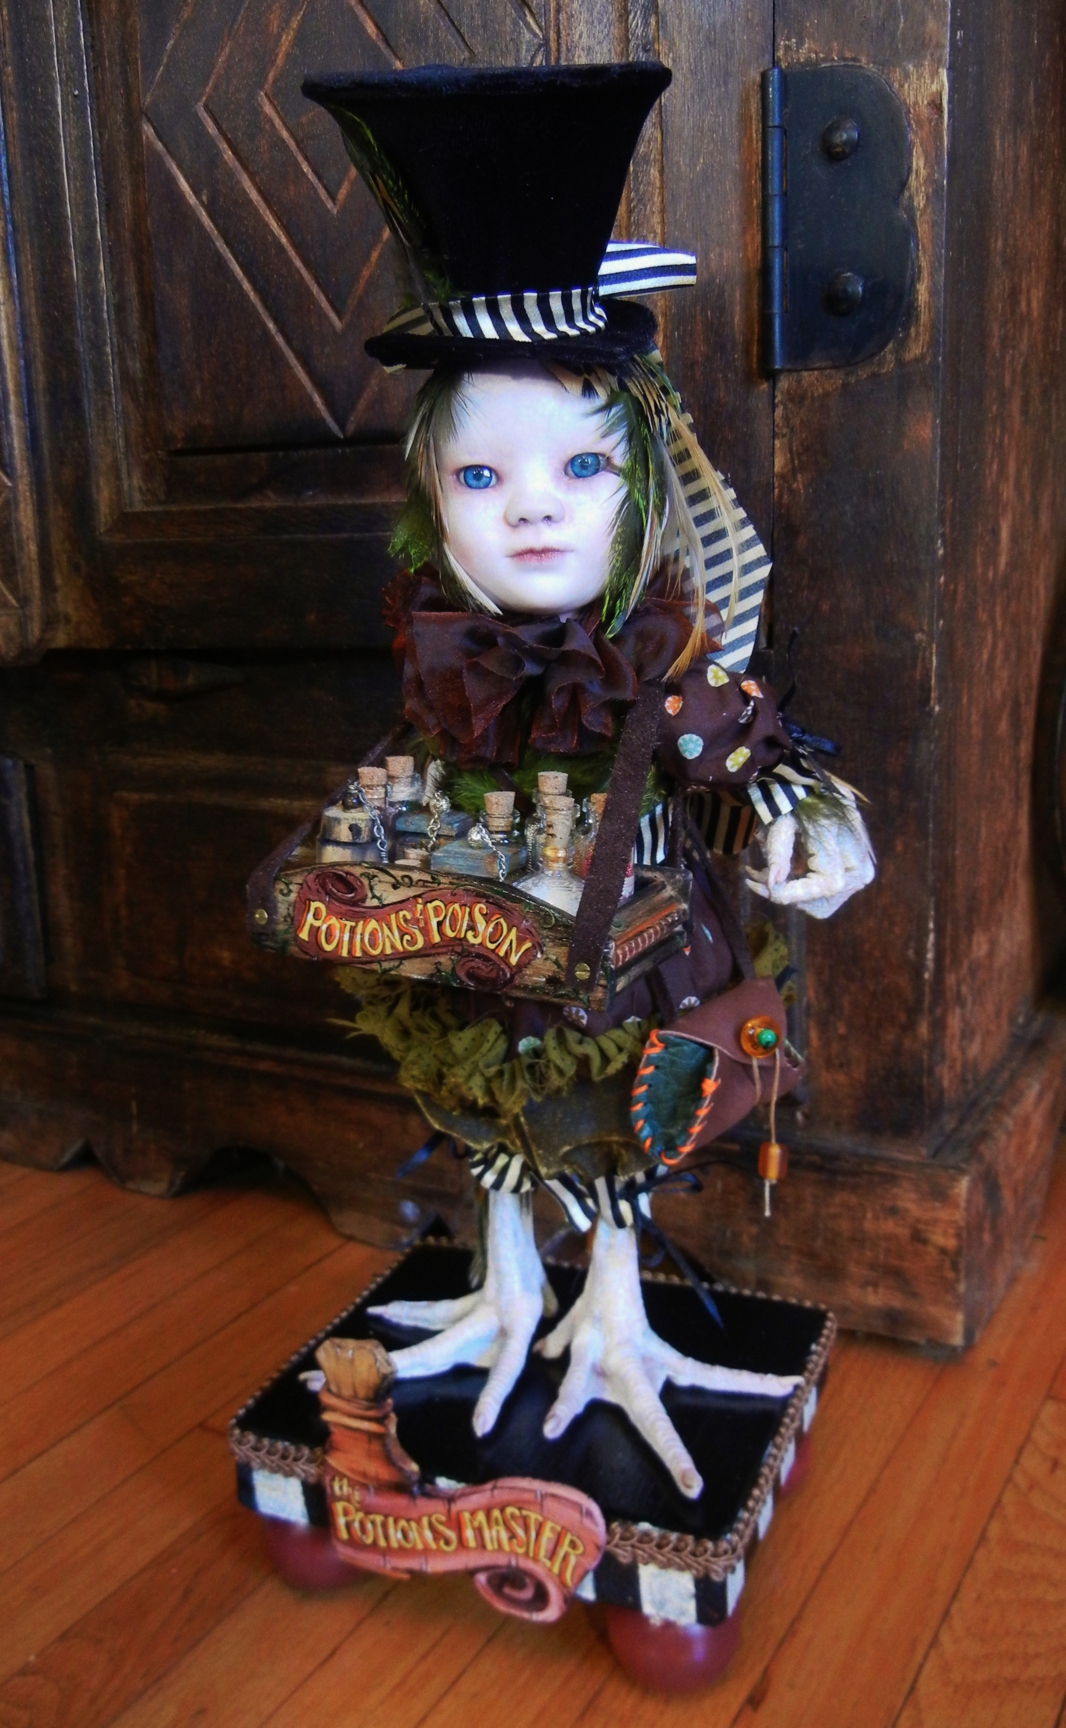 mixed media gothic artdoll green-feathered porcelain doll wearing black velvet tophat has taxidermy birdfeet and holds wooden tray of assorted glass bottles of potions and poisons